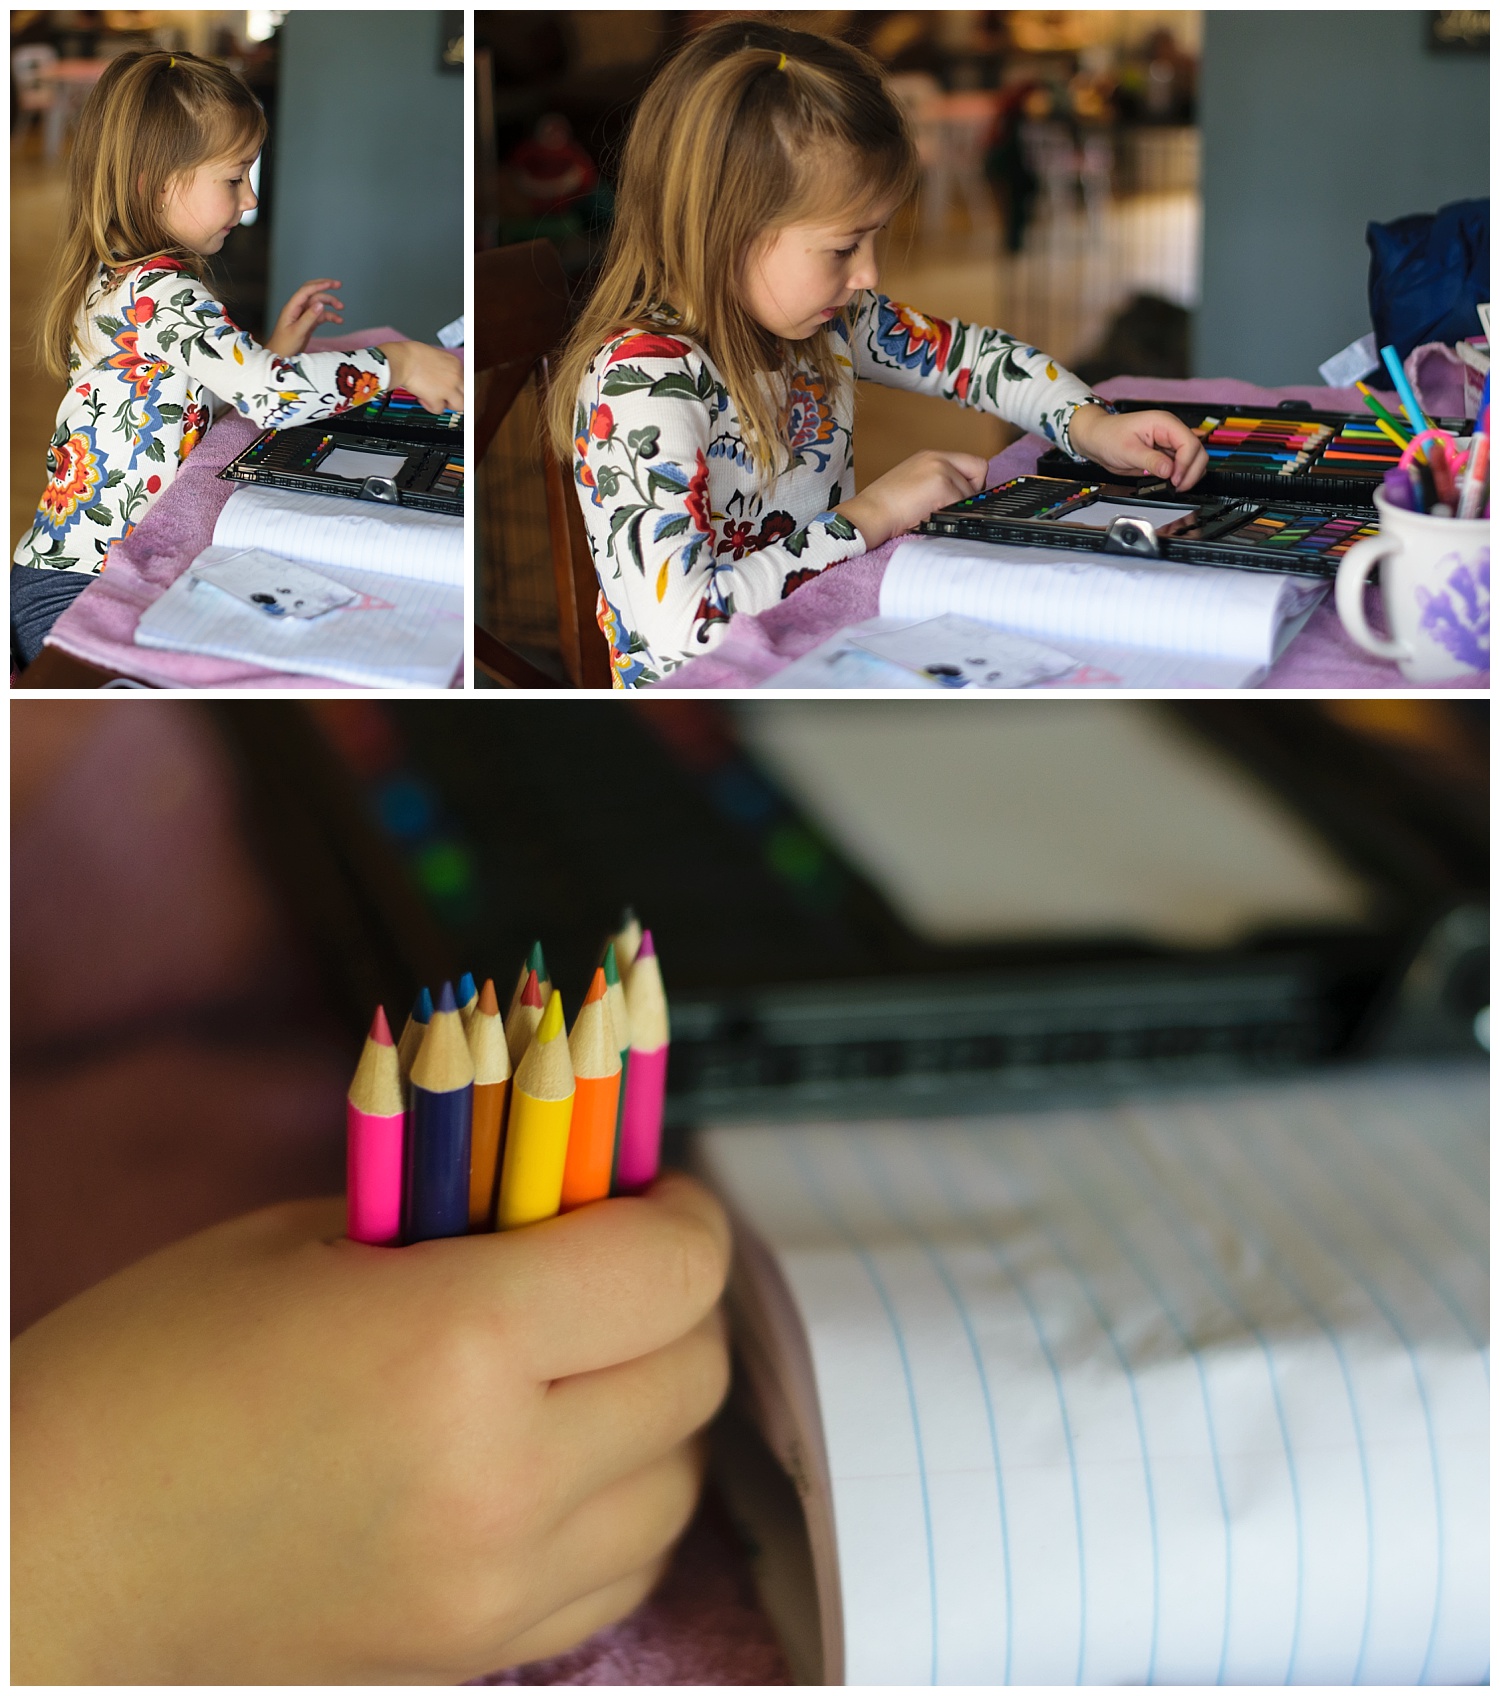 these are images of a girl inside sitting and coloring at the table. 